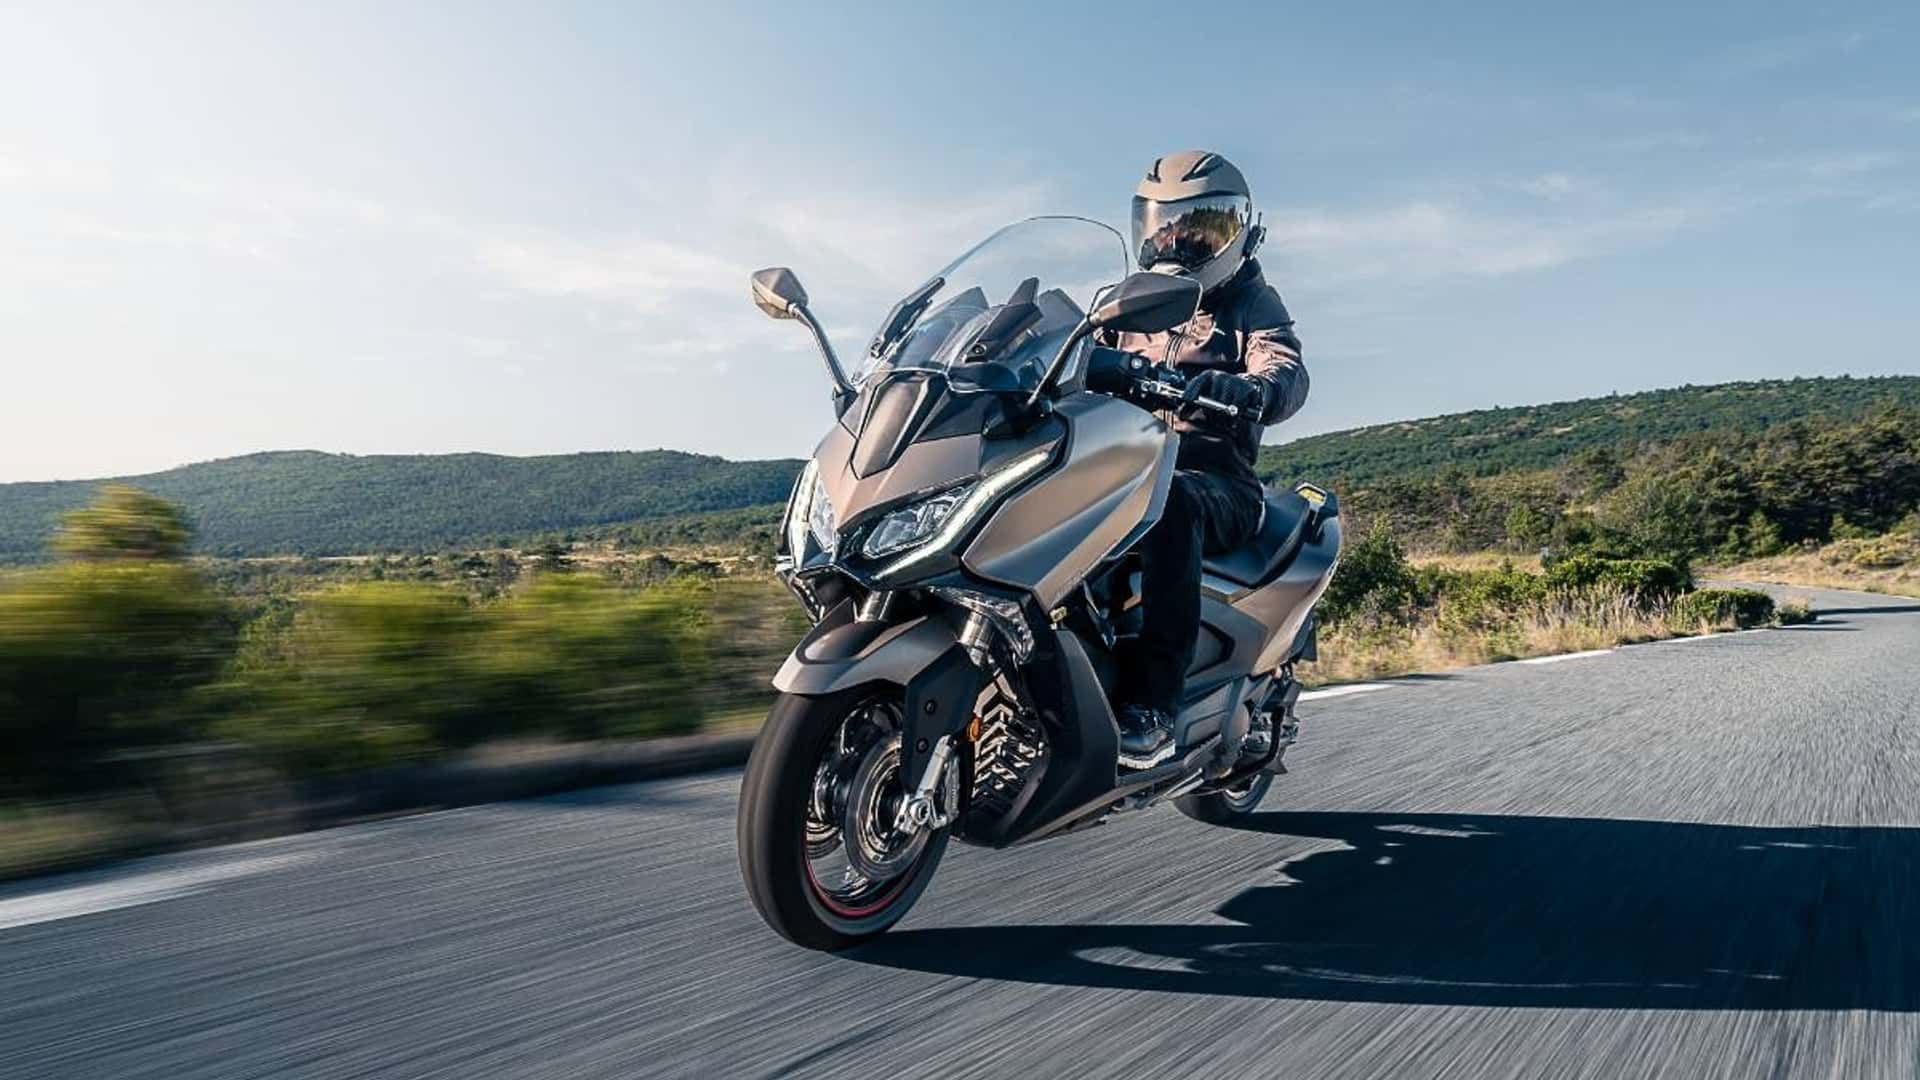 KYMCO AK 550 2023 gets a new look with the Premium version, taking on the Yamaha TMAX KYMCO AK 550 Premium 2023 (4).jpg